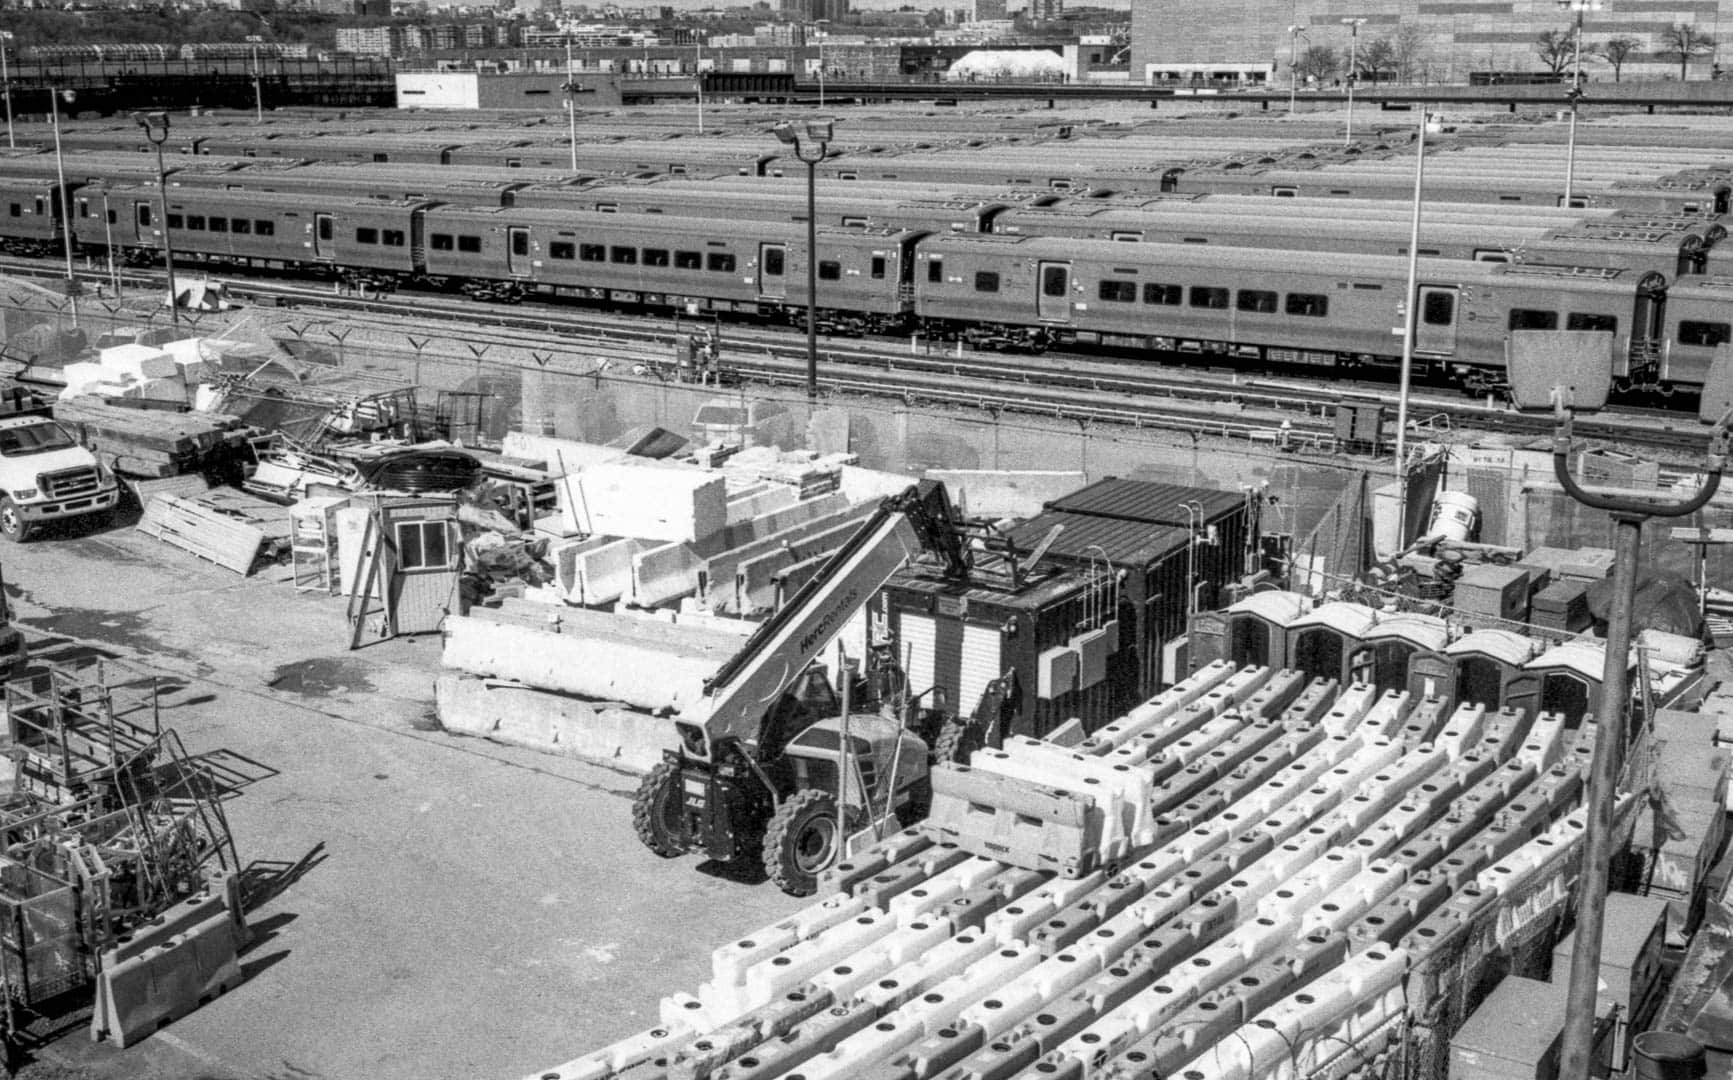 The department of transportation rail yard on the West Side